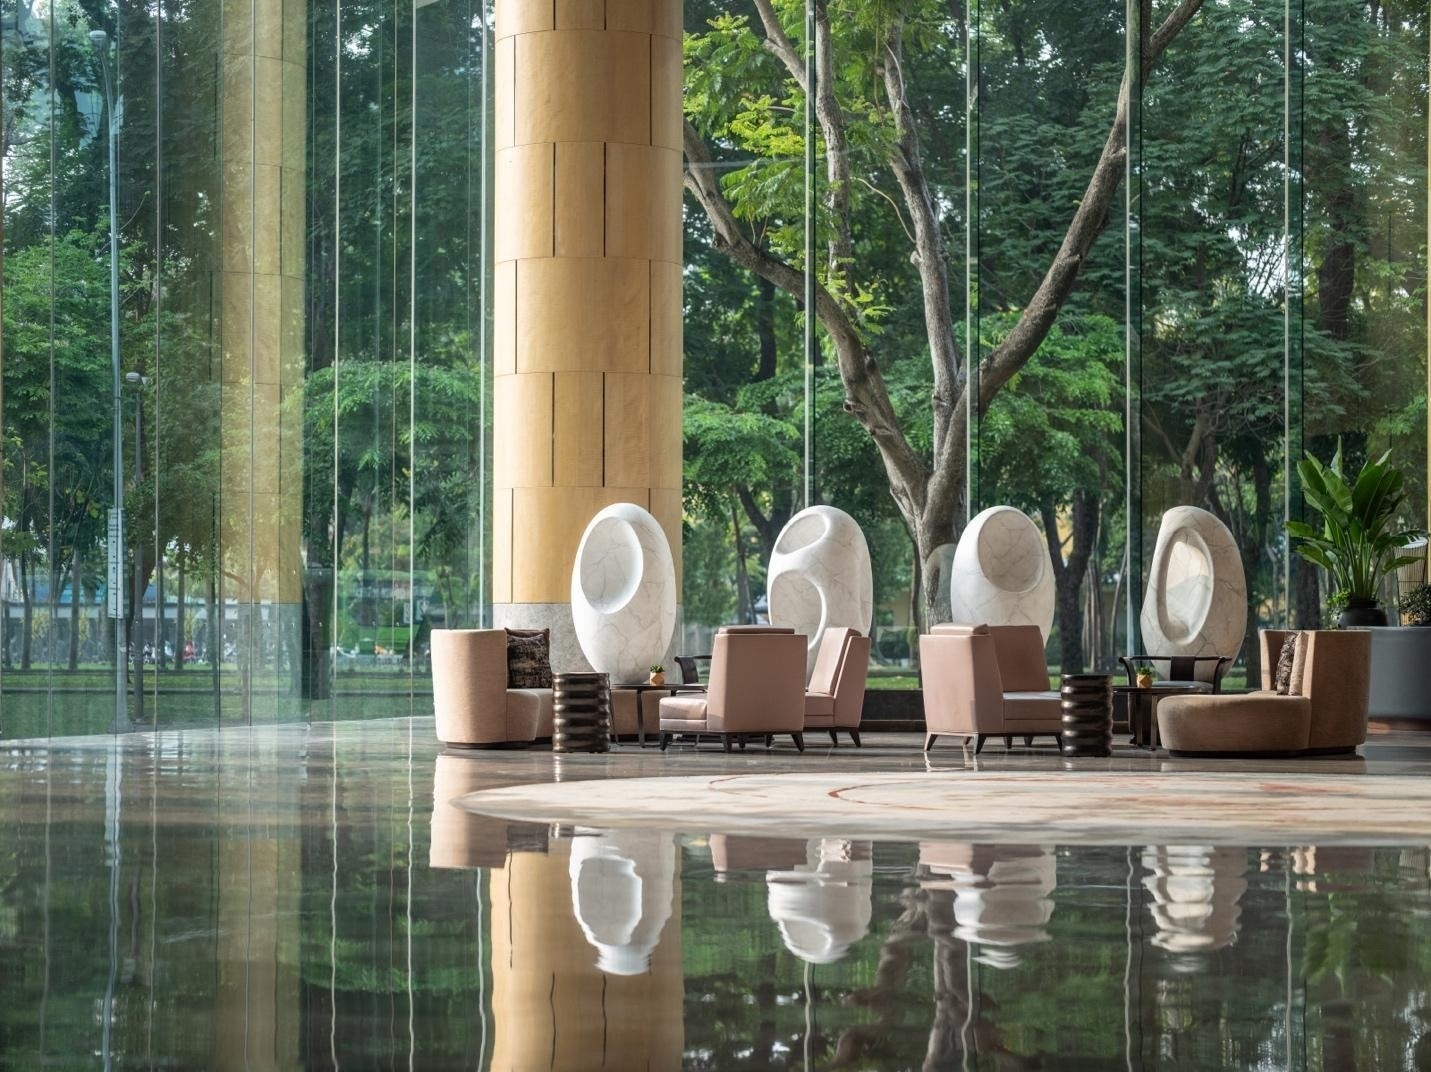 New World Saigon Hotel becomes the first international 5-star hotel in Ho Chi Minh City